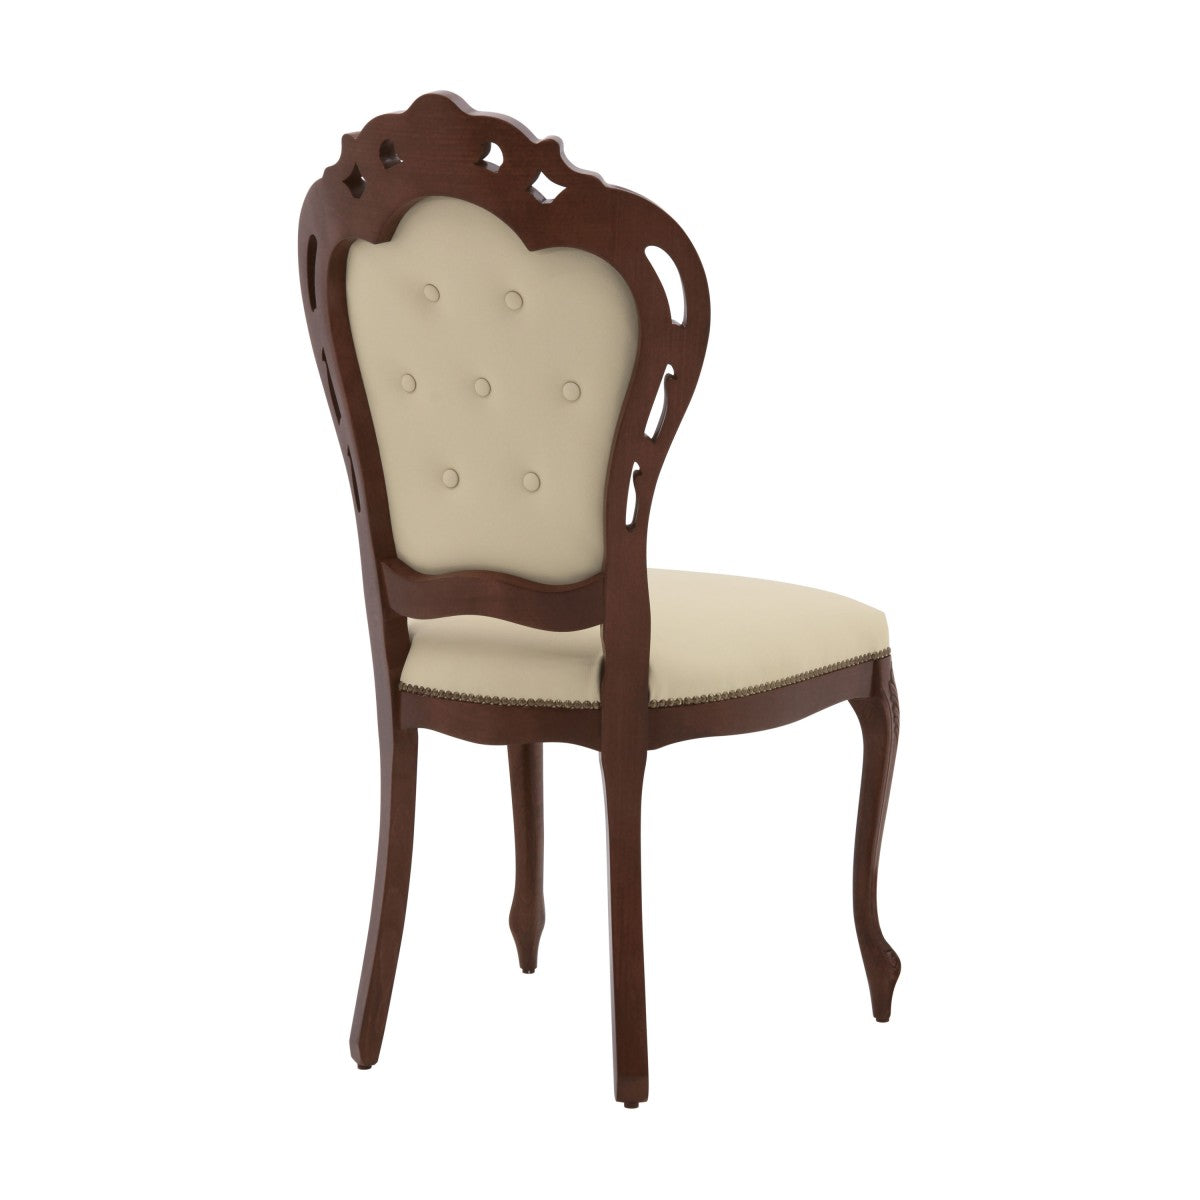 Traforata Bespoke Upholstered Classic Dining Chair MS209S Custom Made To Order